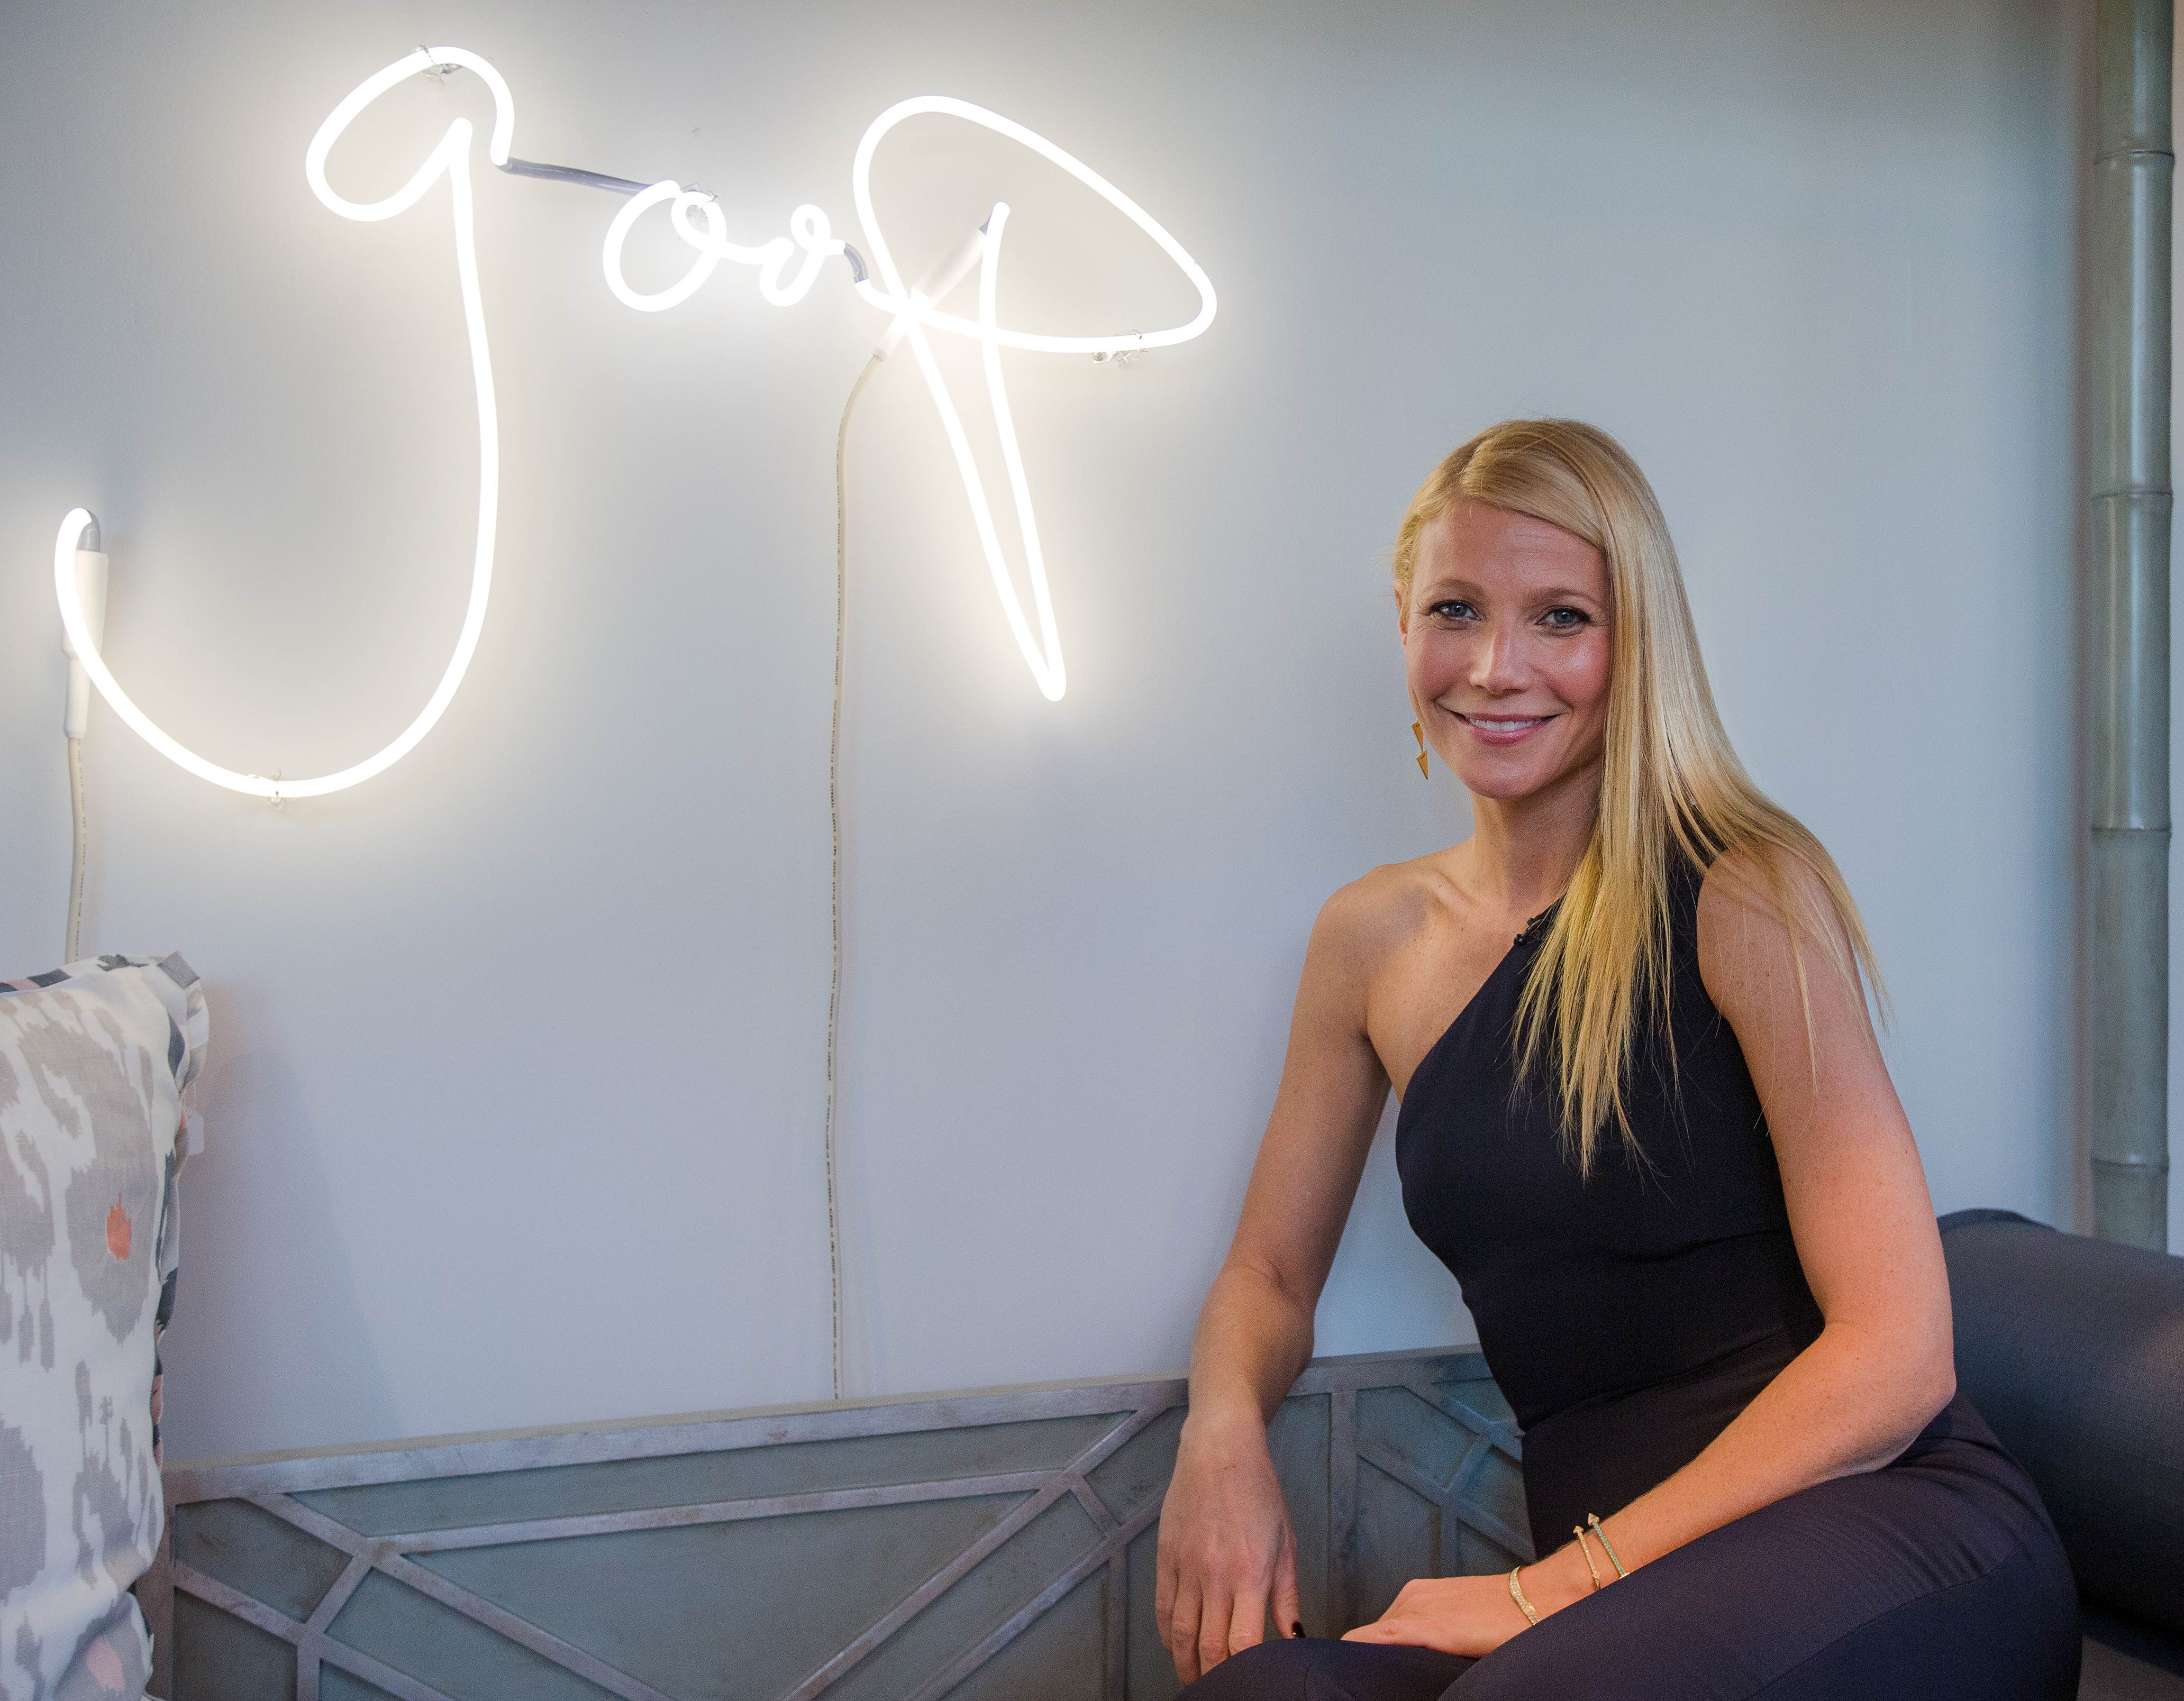 Gwyneth Paltrow attends the goop pop Dallas Launch Party in Highland Park Village on November 20, 2014 in Dallas, Texas. 